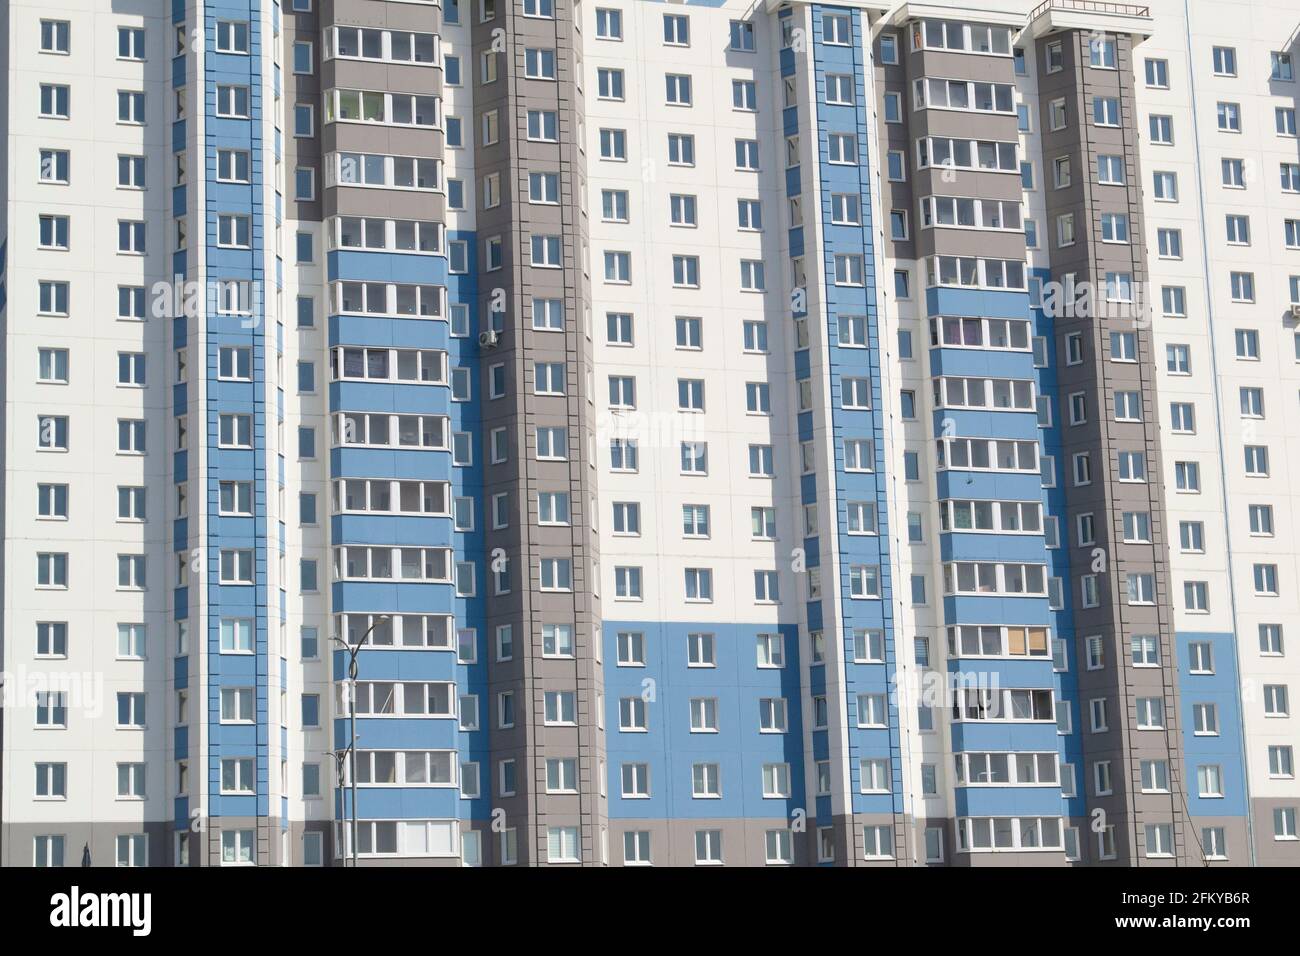 Multiple windows on a large building in the city in blue and white Stock Photo